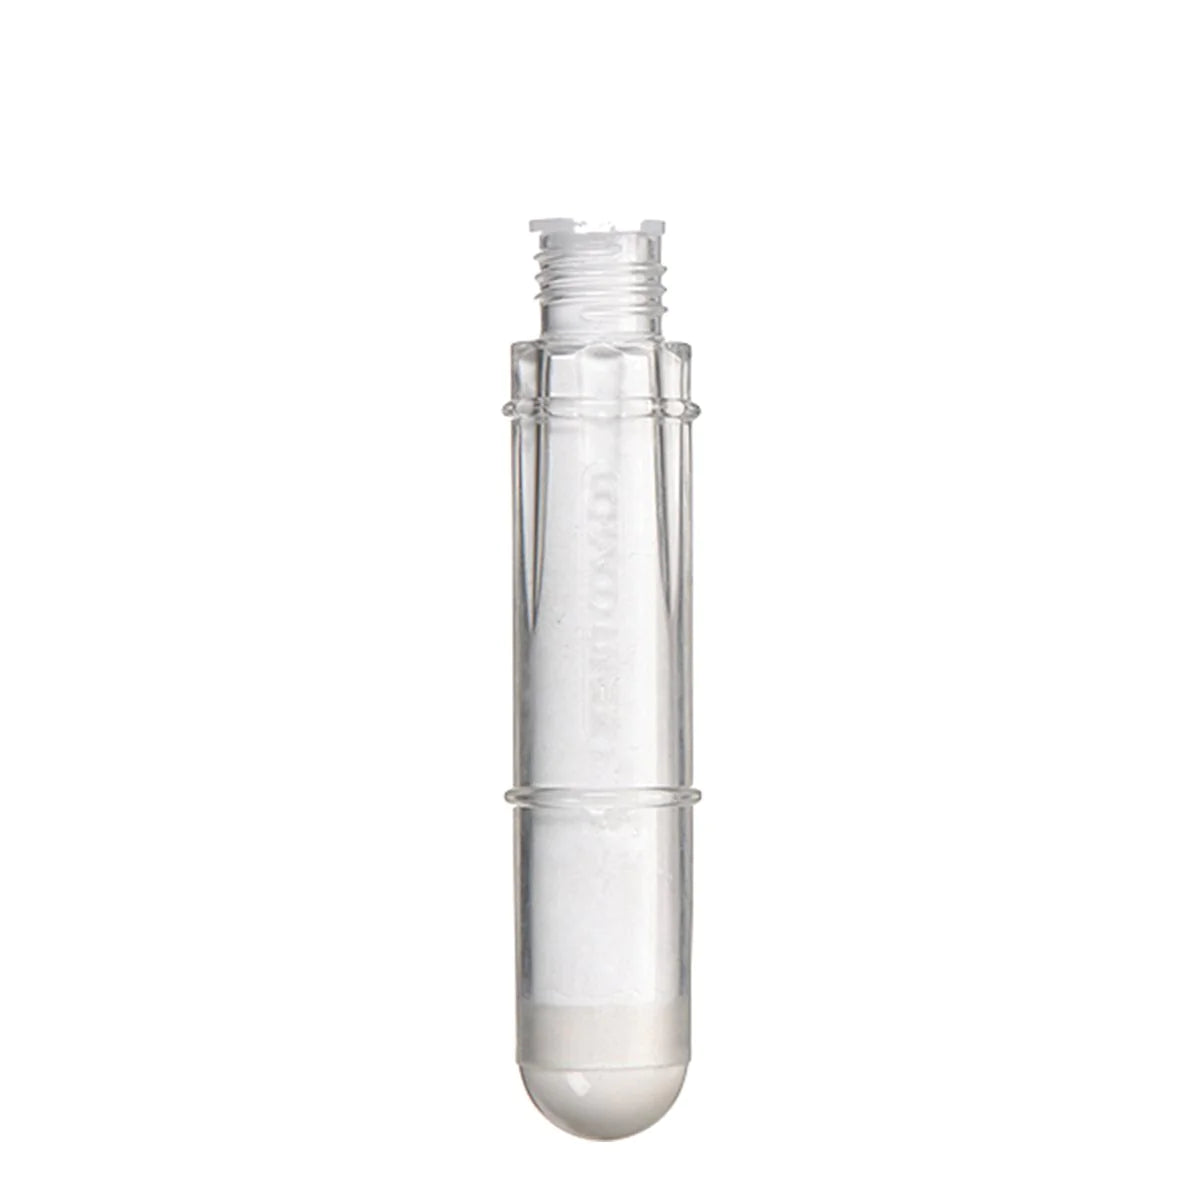 Pen-Style Chaco Liner Refill Cartridge